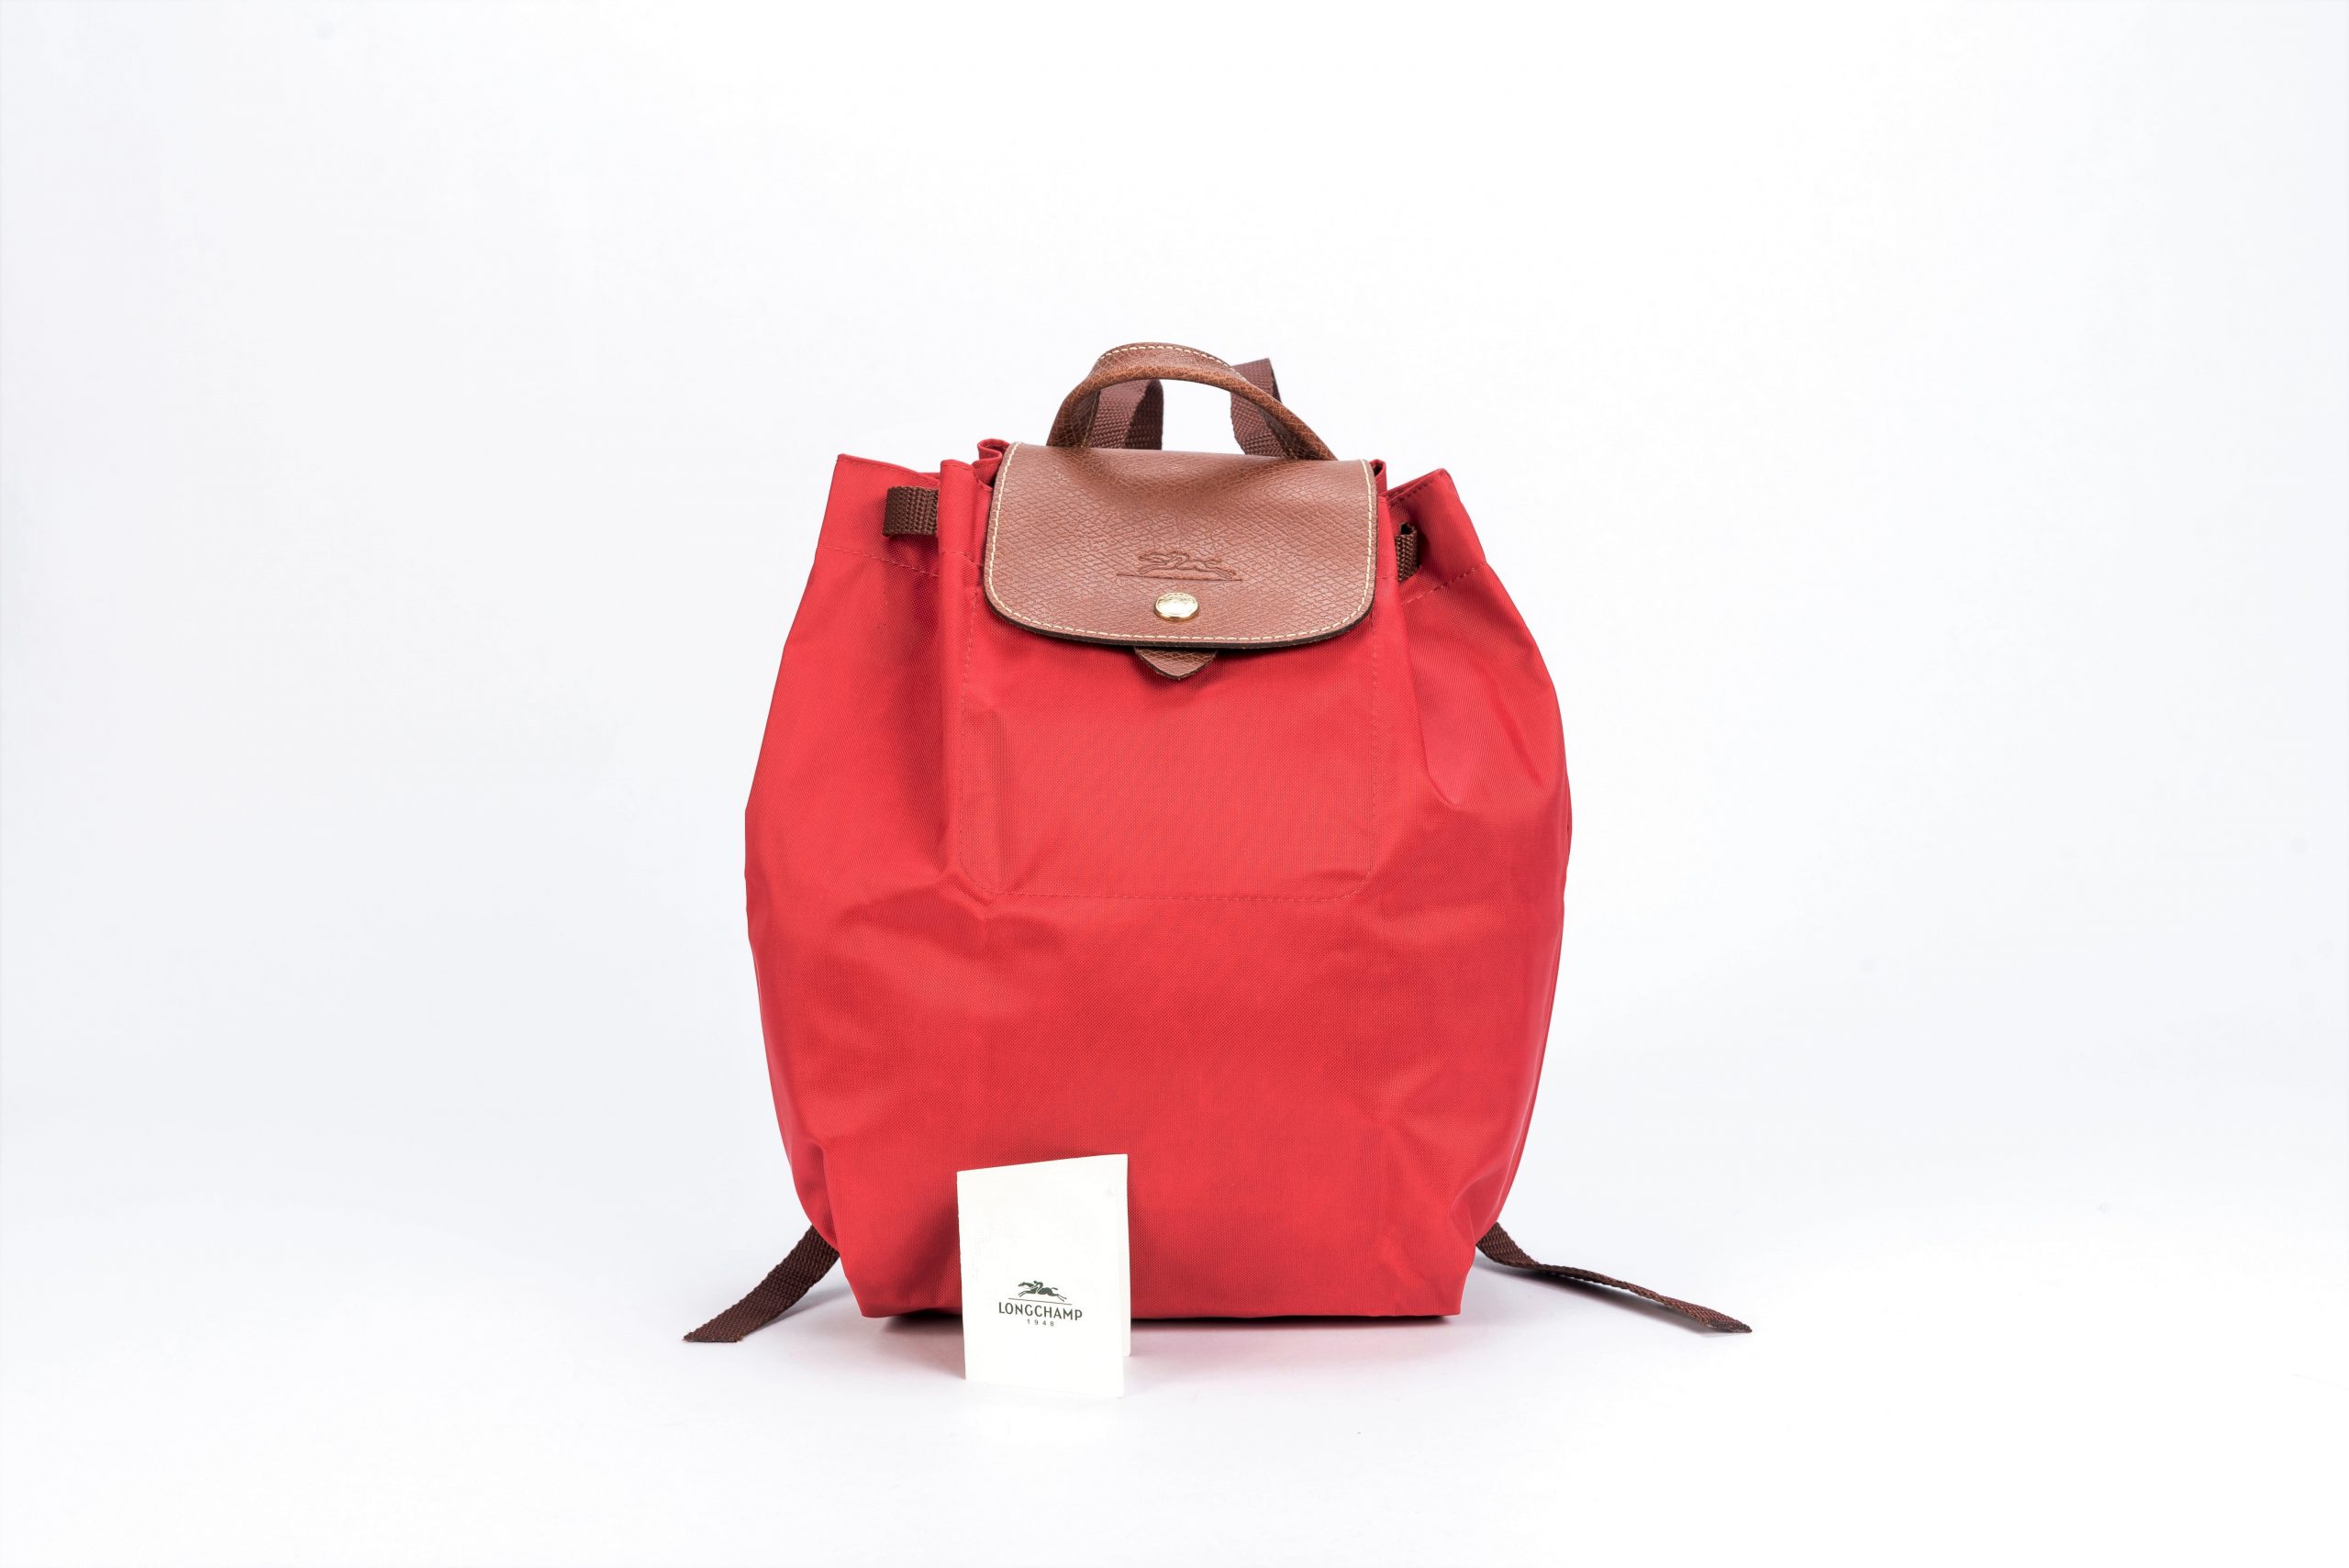 Longchamp Le Pliage Backpack in Red (1)